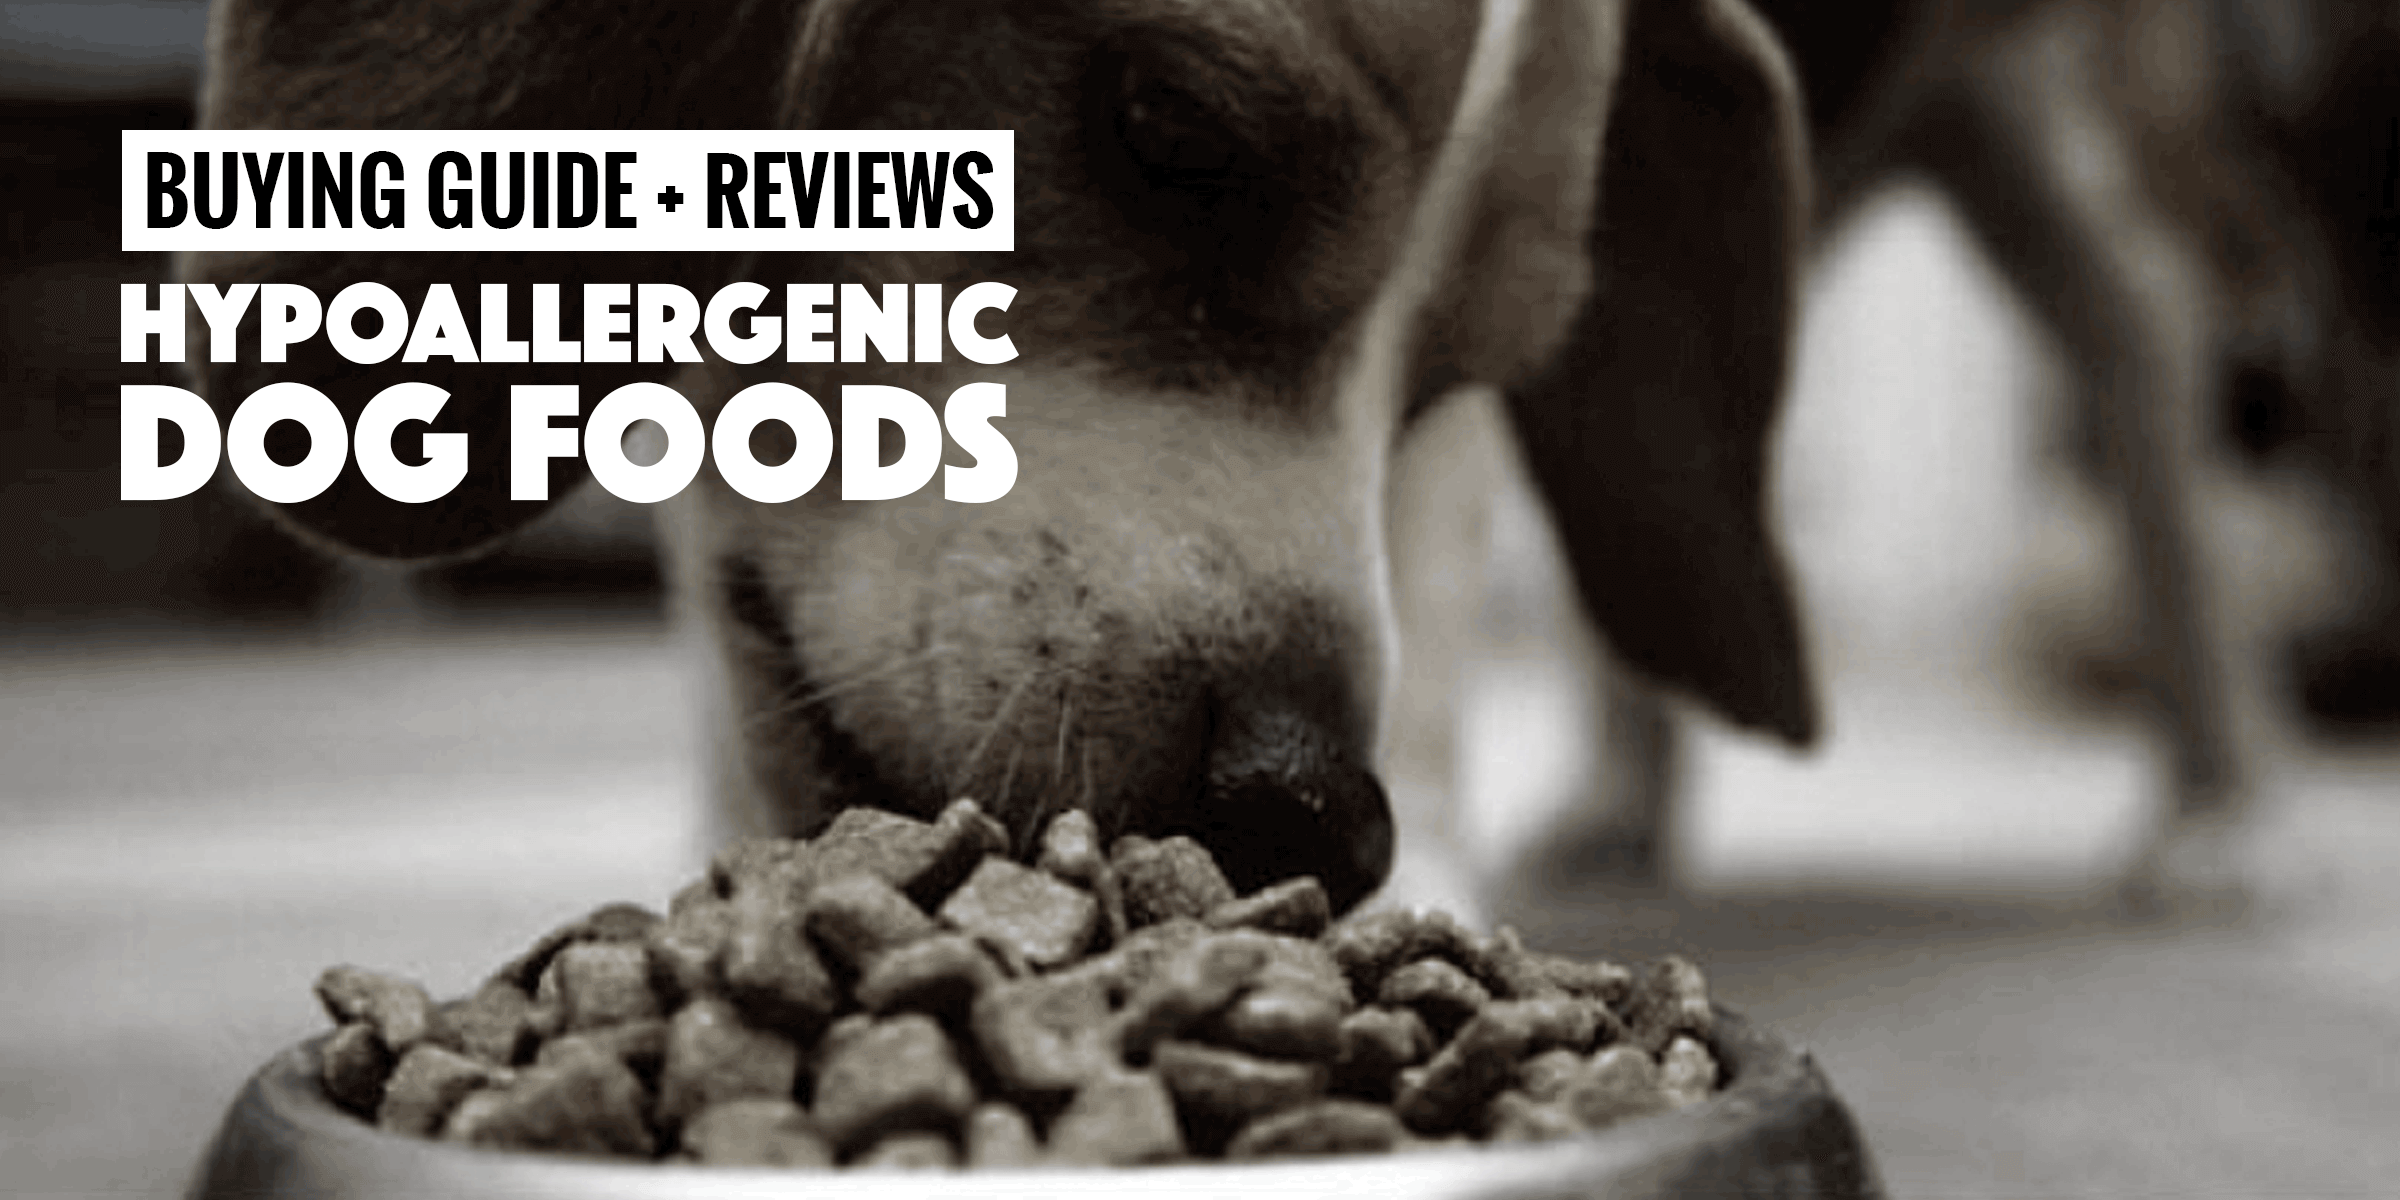 Top 5 Best Hypoallergenic Dog Foods + Buying Guide and Reviews